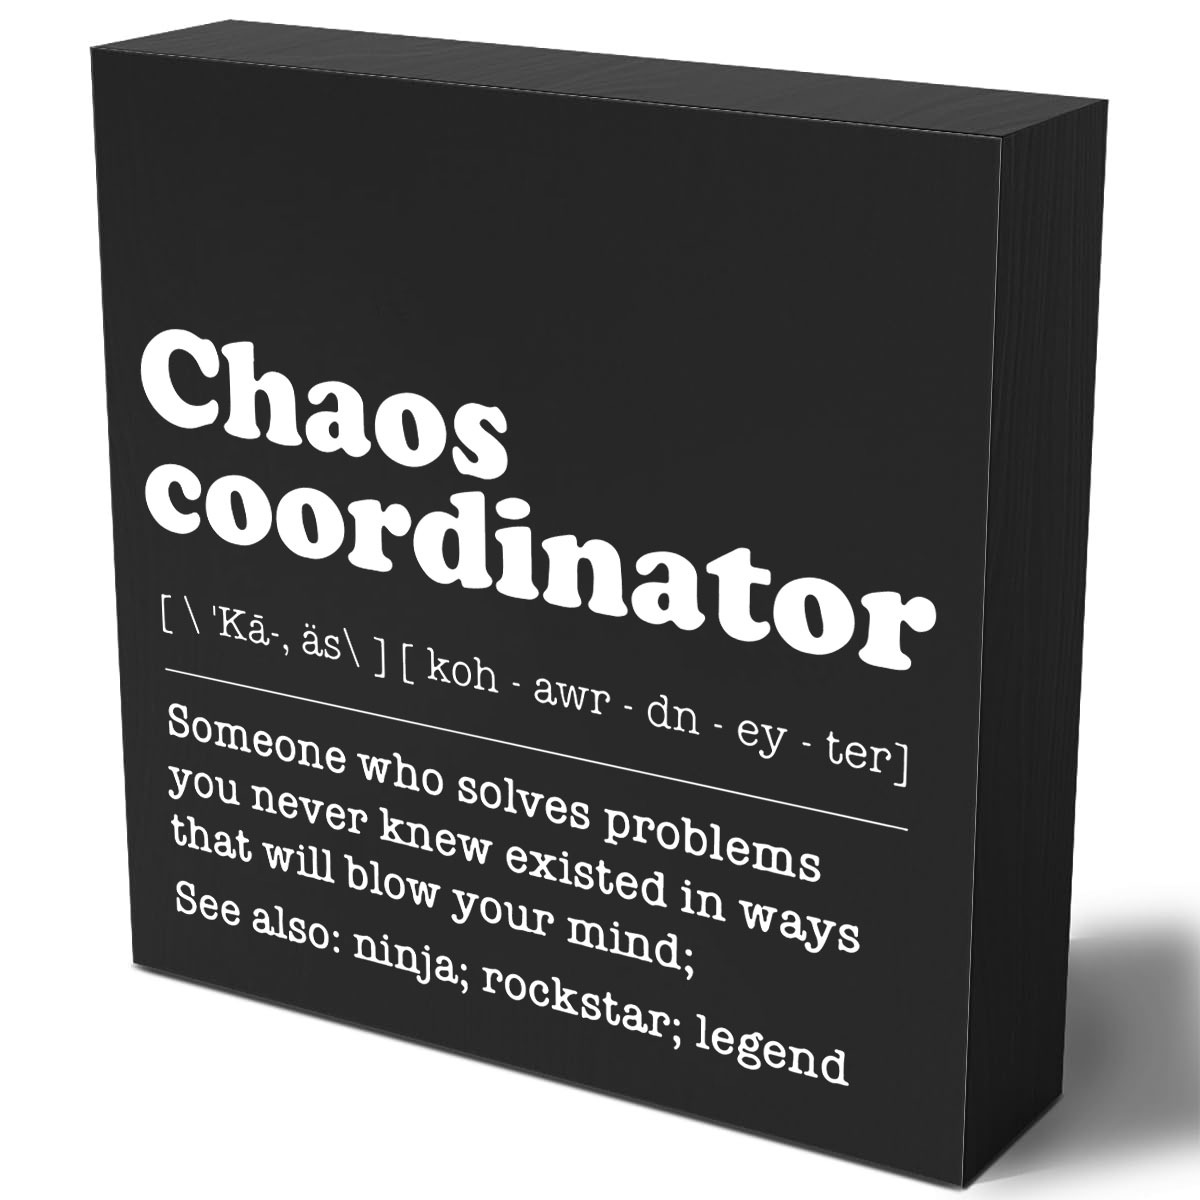 

1pc, Funny Office Wood Box Sign, Chaos Coordinator Sign, Funny Office Desk Decor For Women, Men, Coworker, Mom, Friends, Boss, Lady, Funny Chaos Coordinator Desk Decor For Coworkers, Women